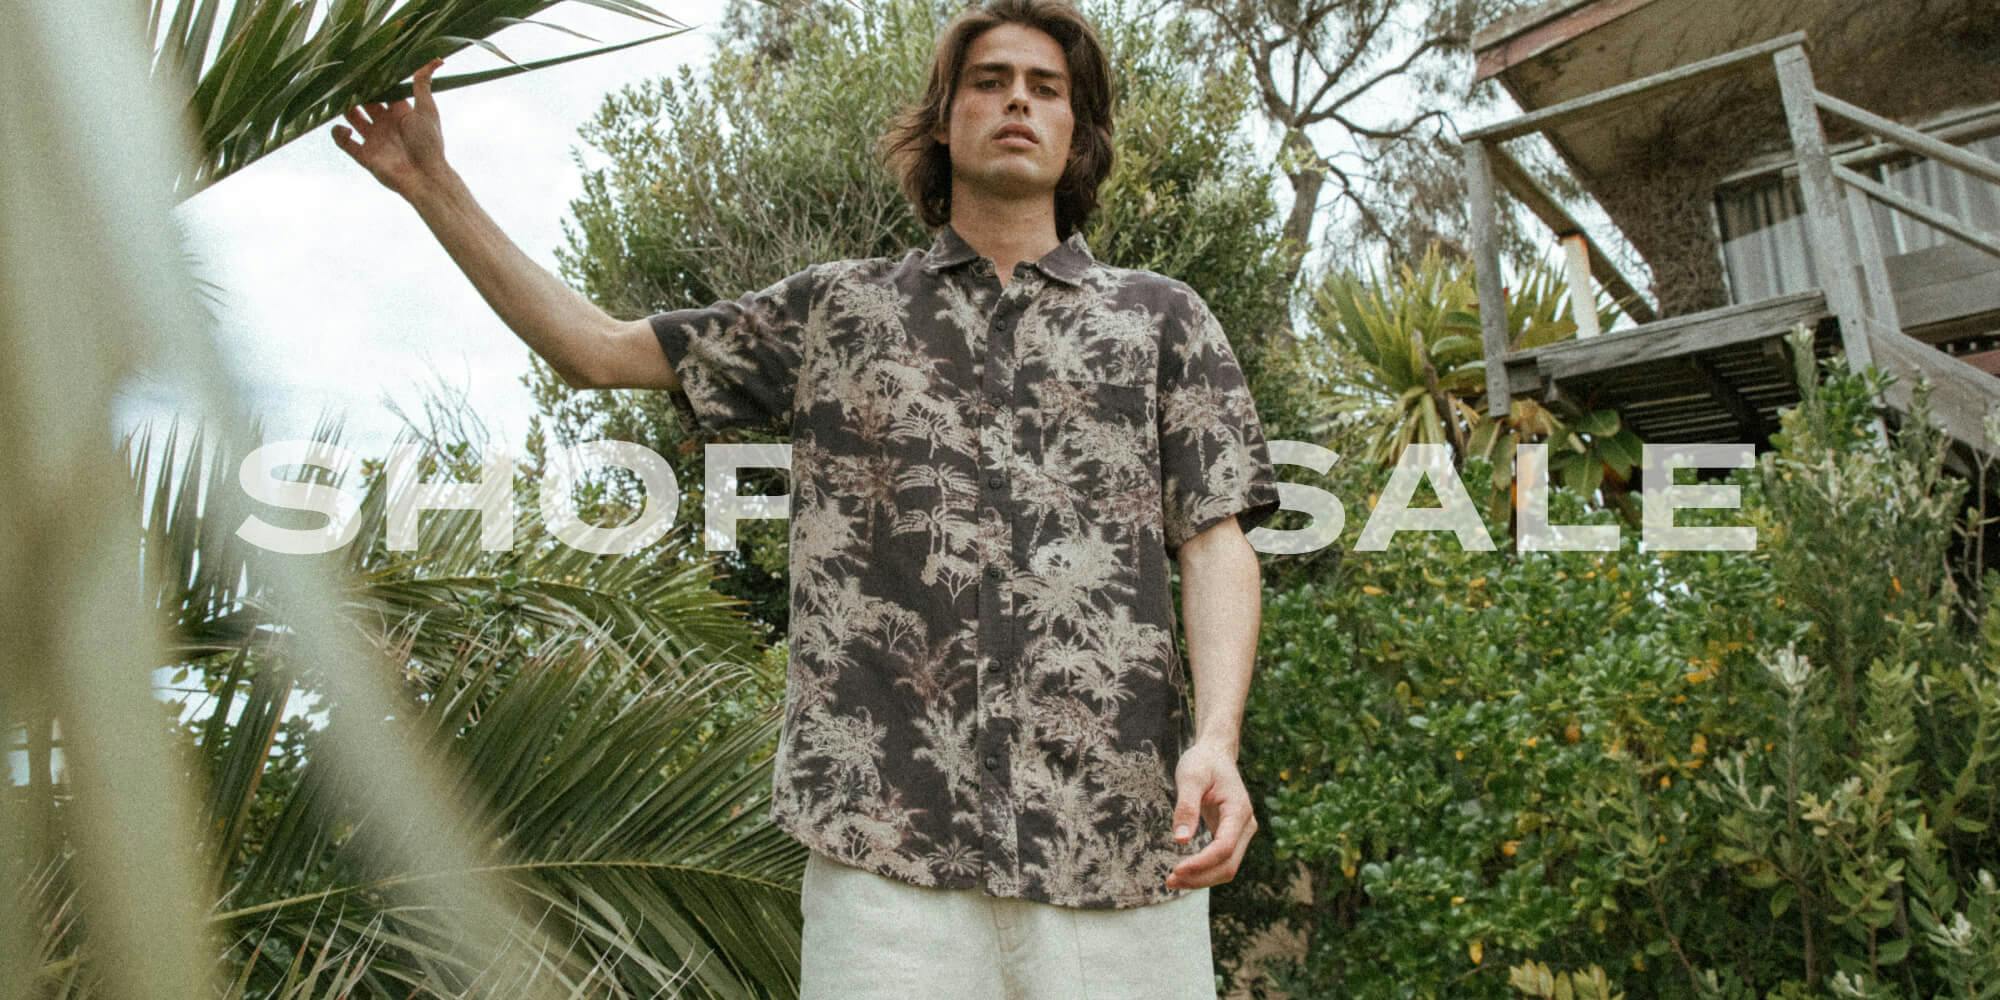 Image of male model standing amount garden foliage. He is wearing the Byron Shirt and the Drill Shorts. Text overlay: Shop sale'